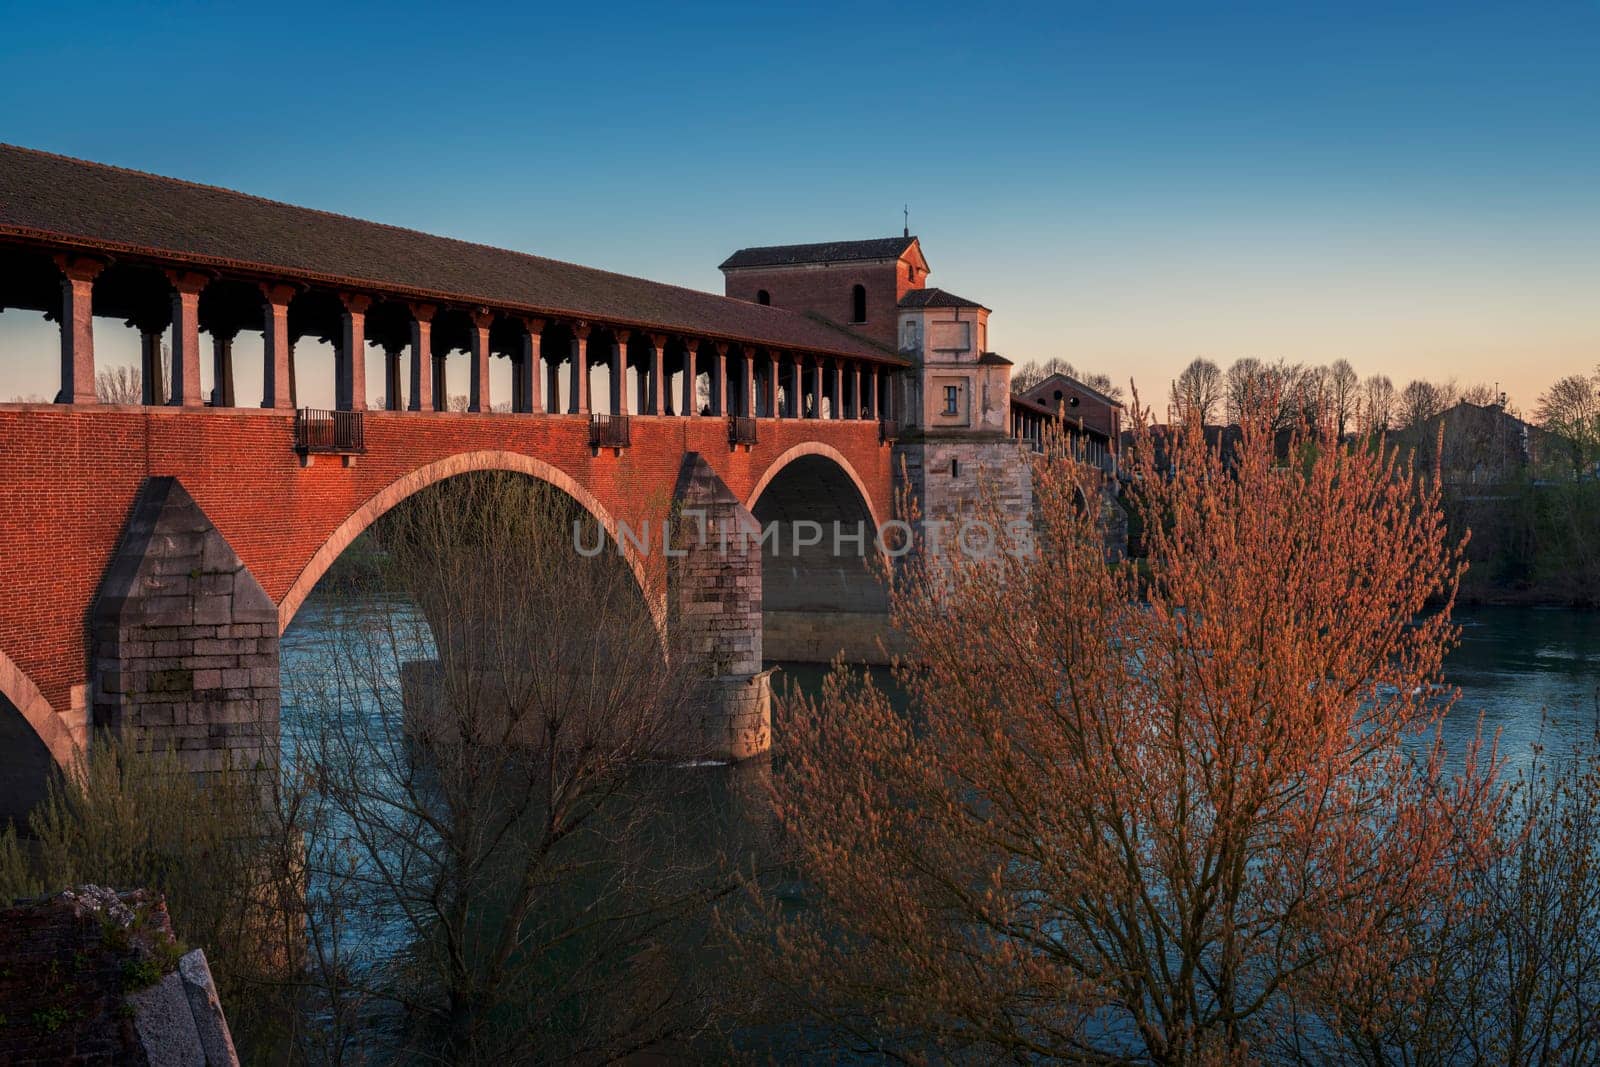 Awesome view of Ponte Coperto Pavia (covered bridge) at sunset by Robertobinetti70